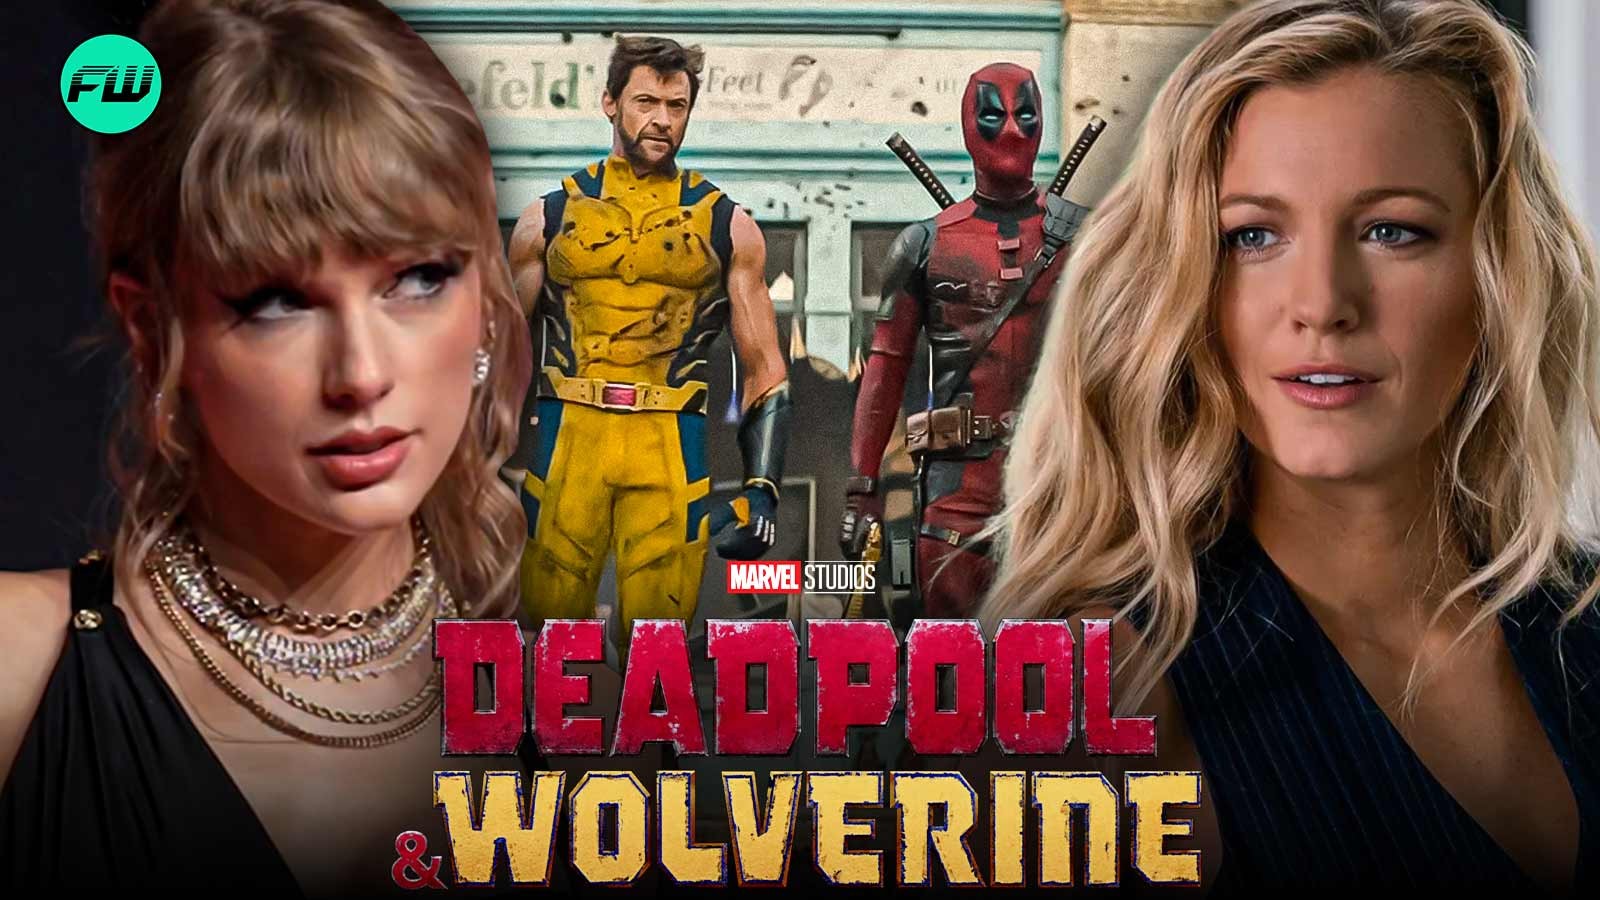 taylor swift, blake lively, deadpool and wolverine